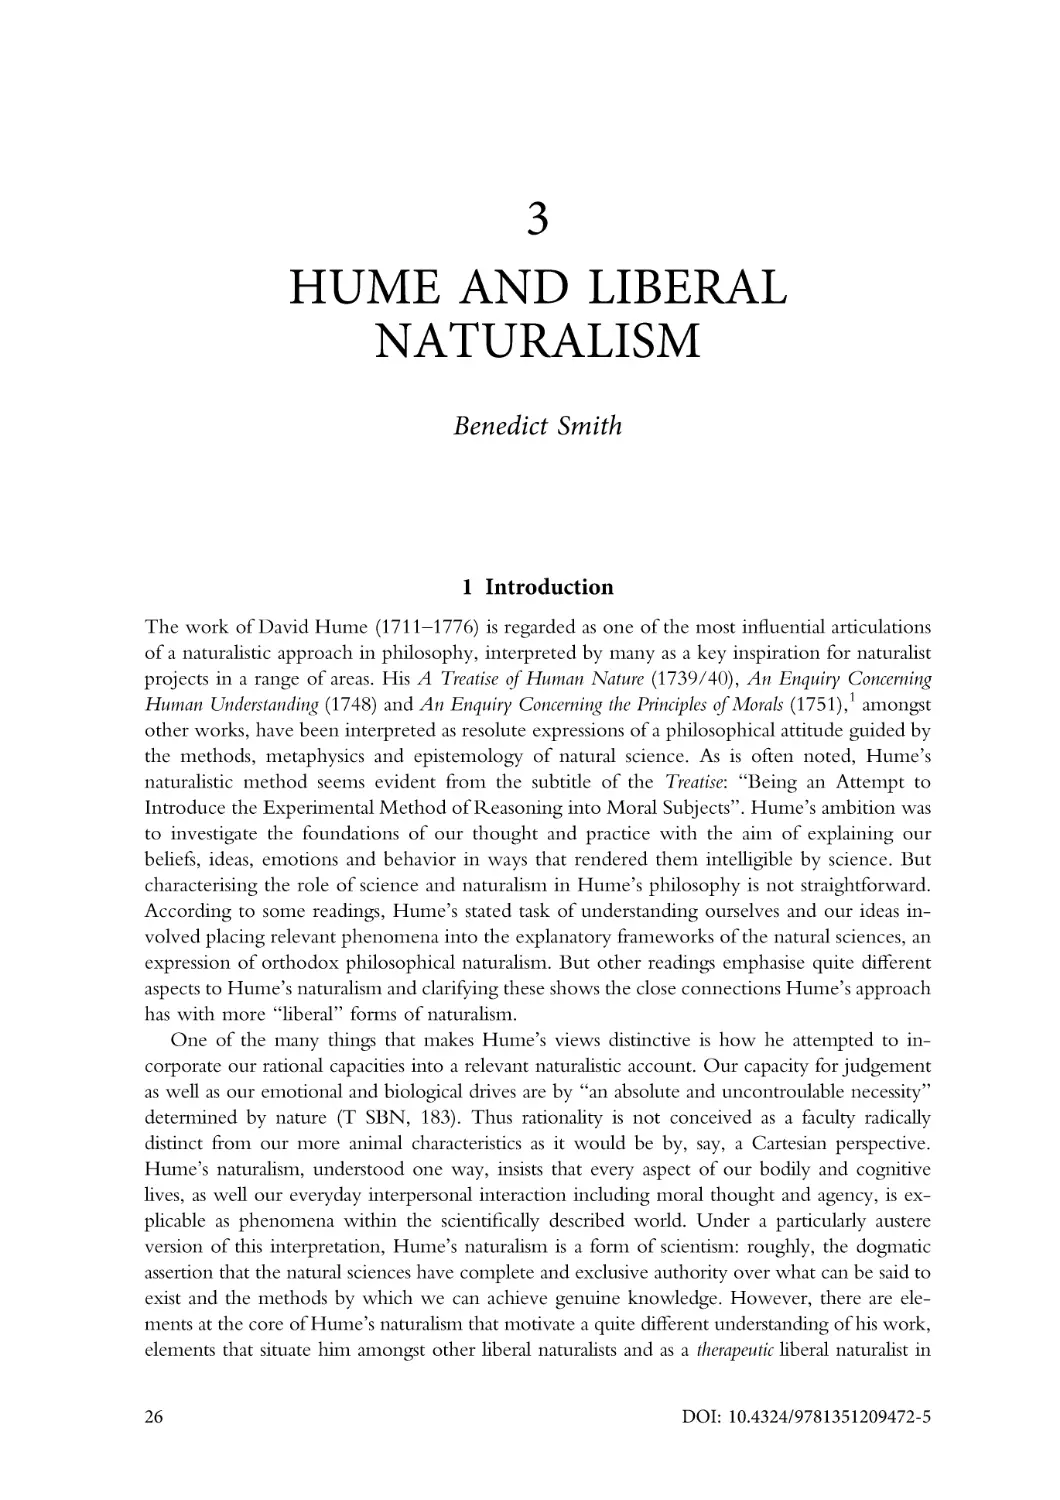 3. Hume and liberal naturalism
1. Introduction